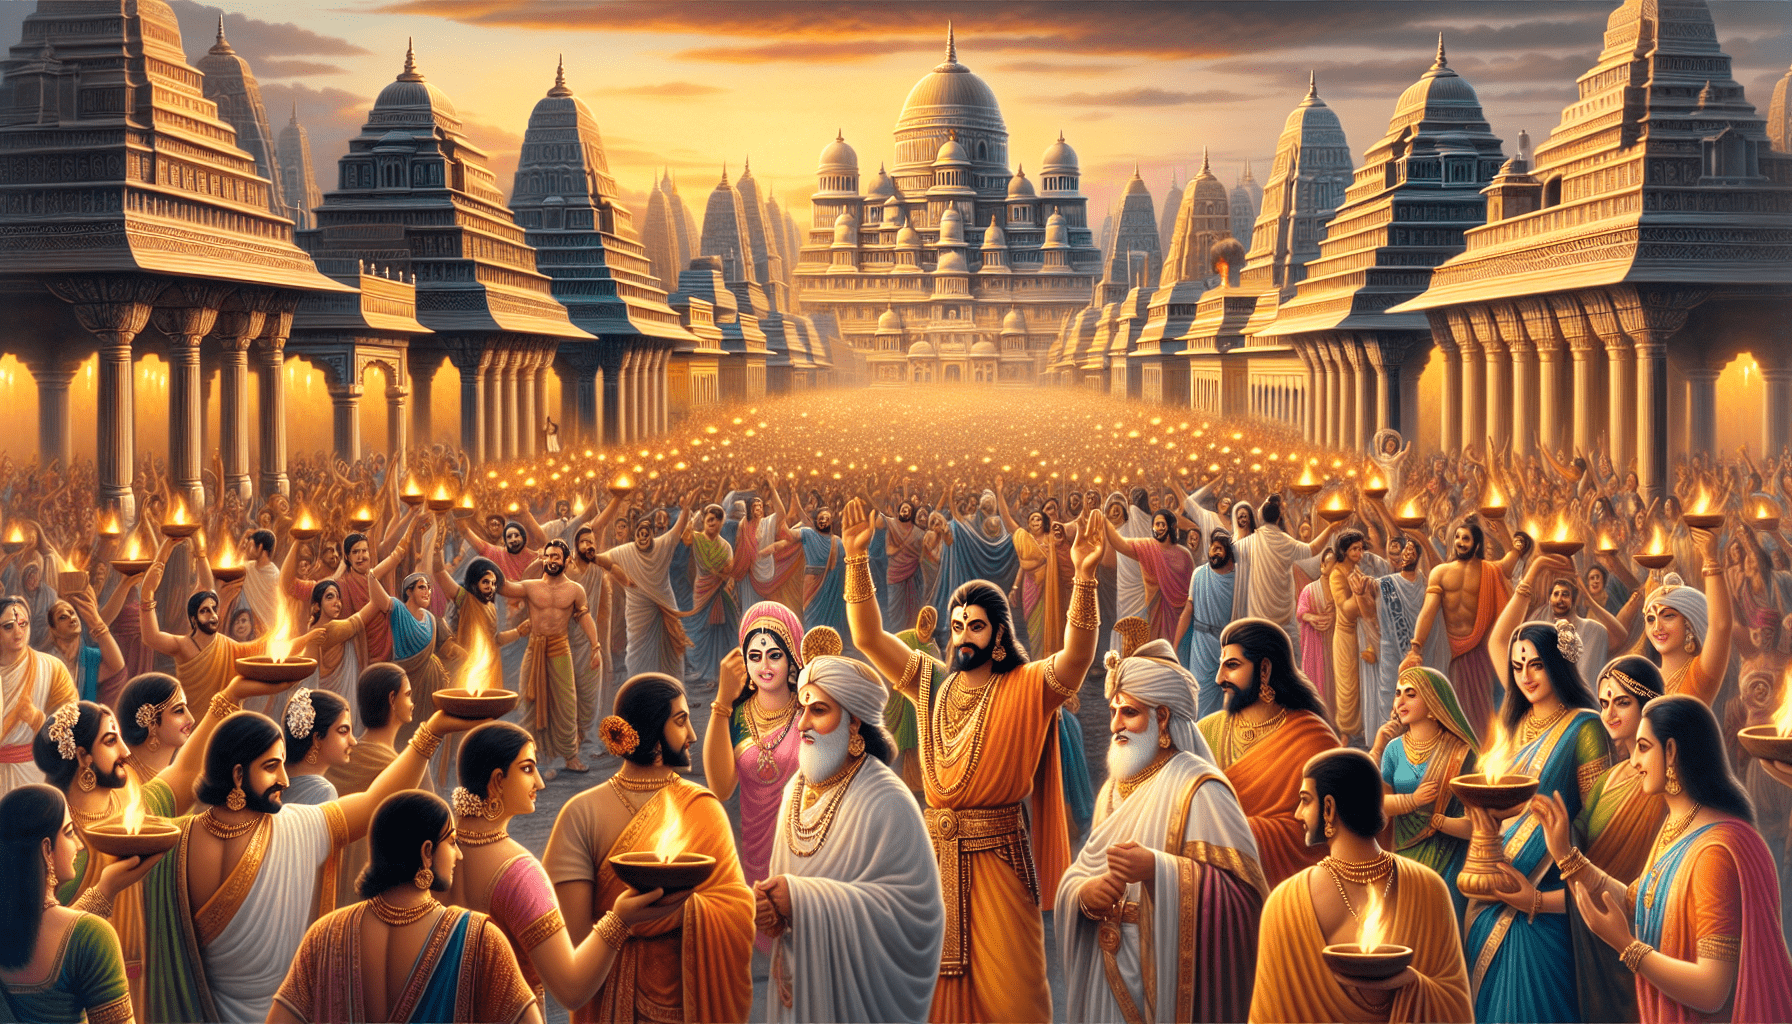 What Is The Ayodhya Kandam In Short?